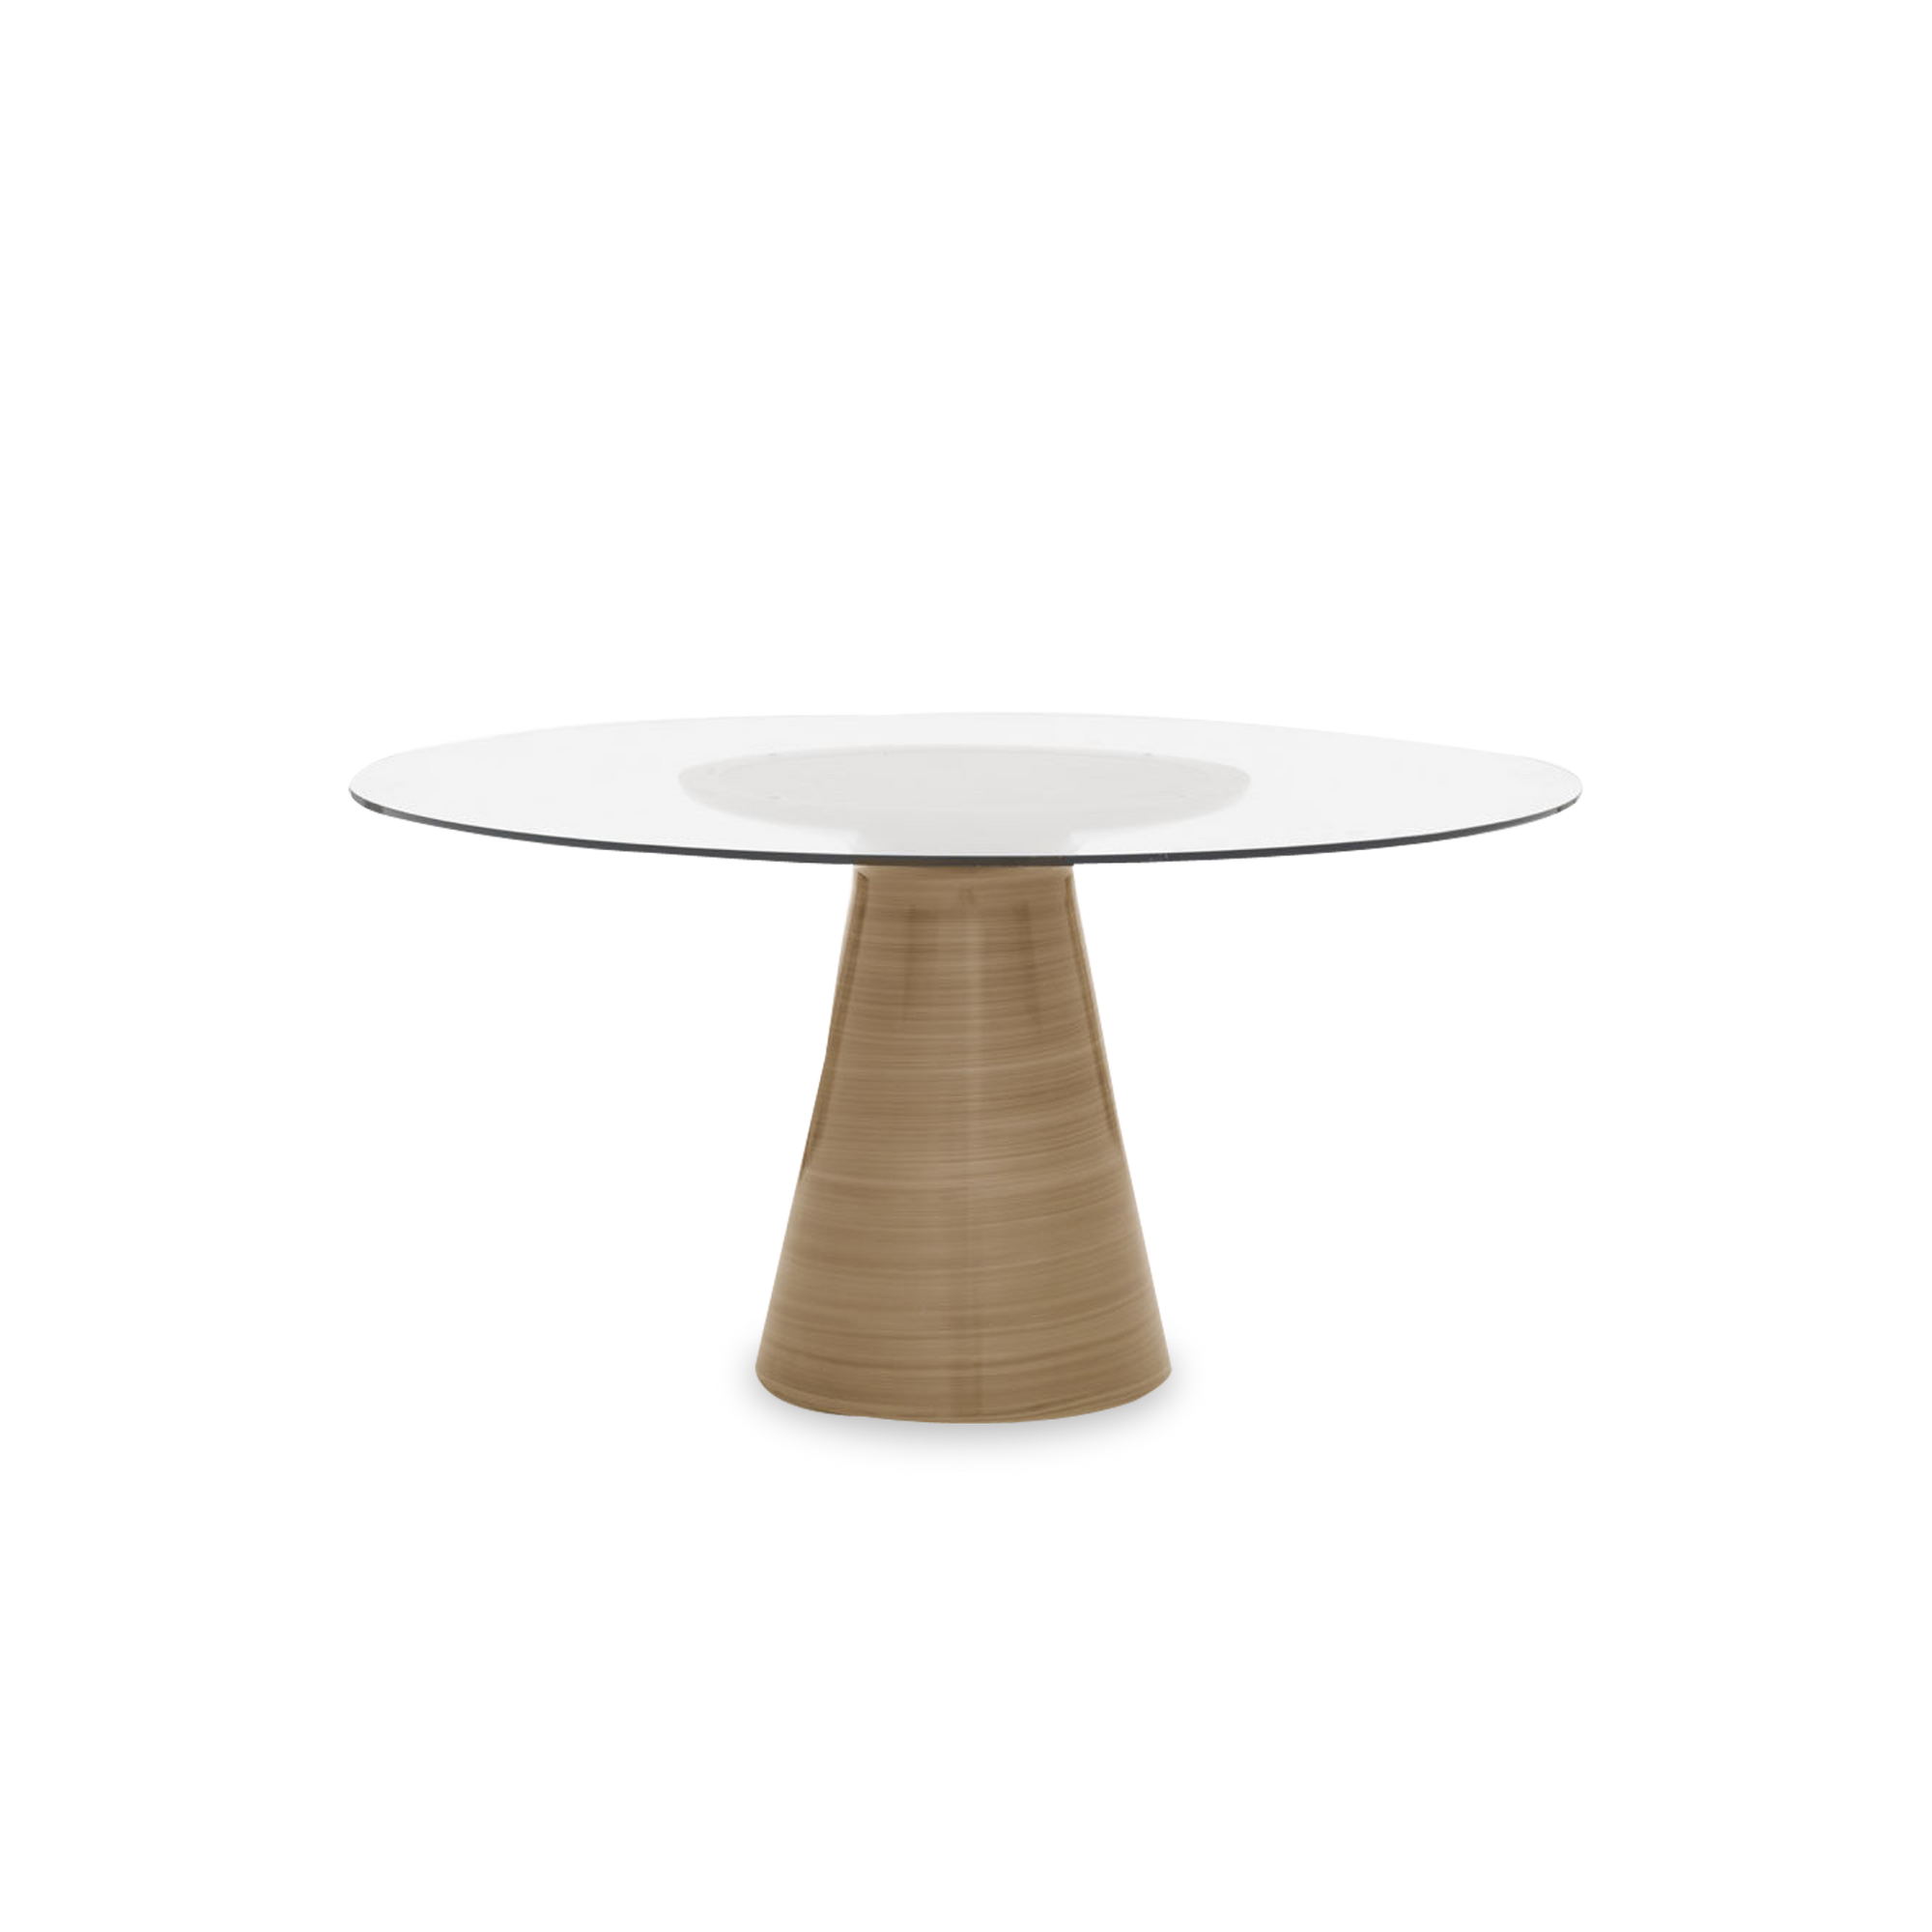 Simply elegant, the Taper Dining Table invites conversation.